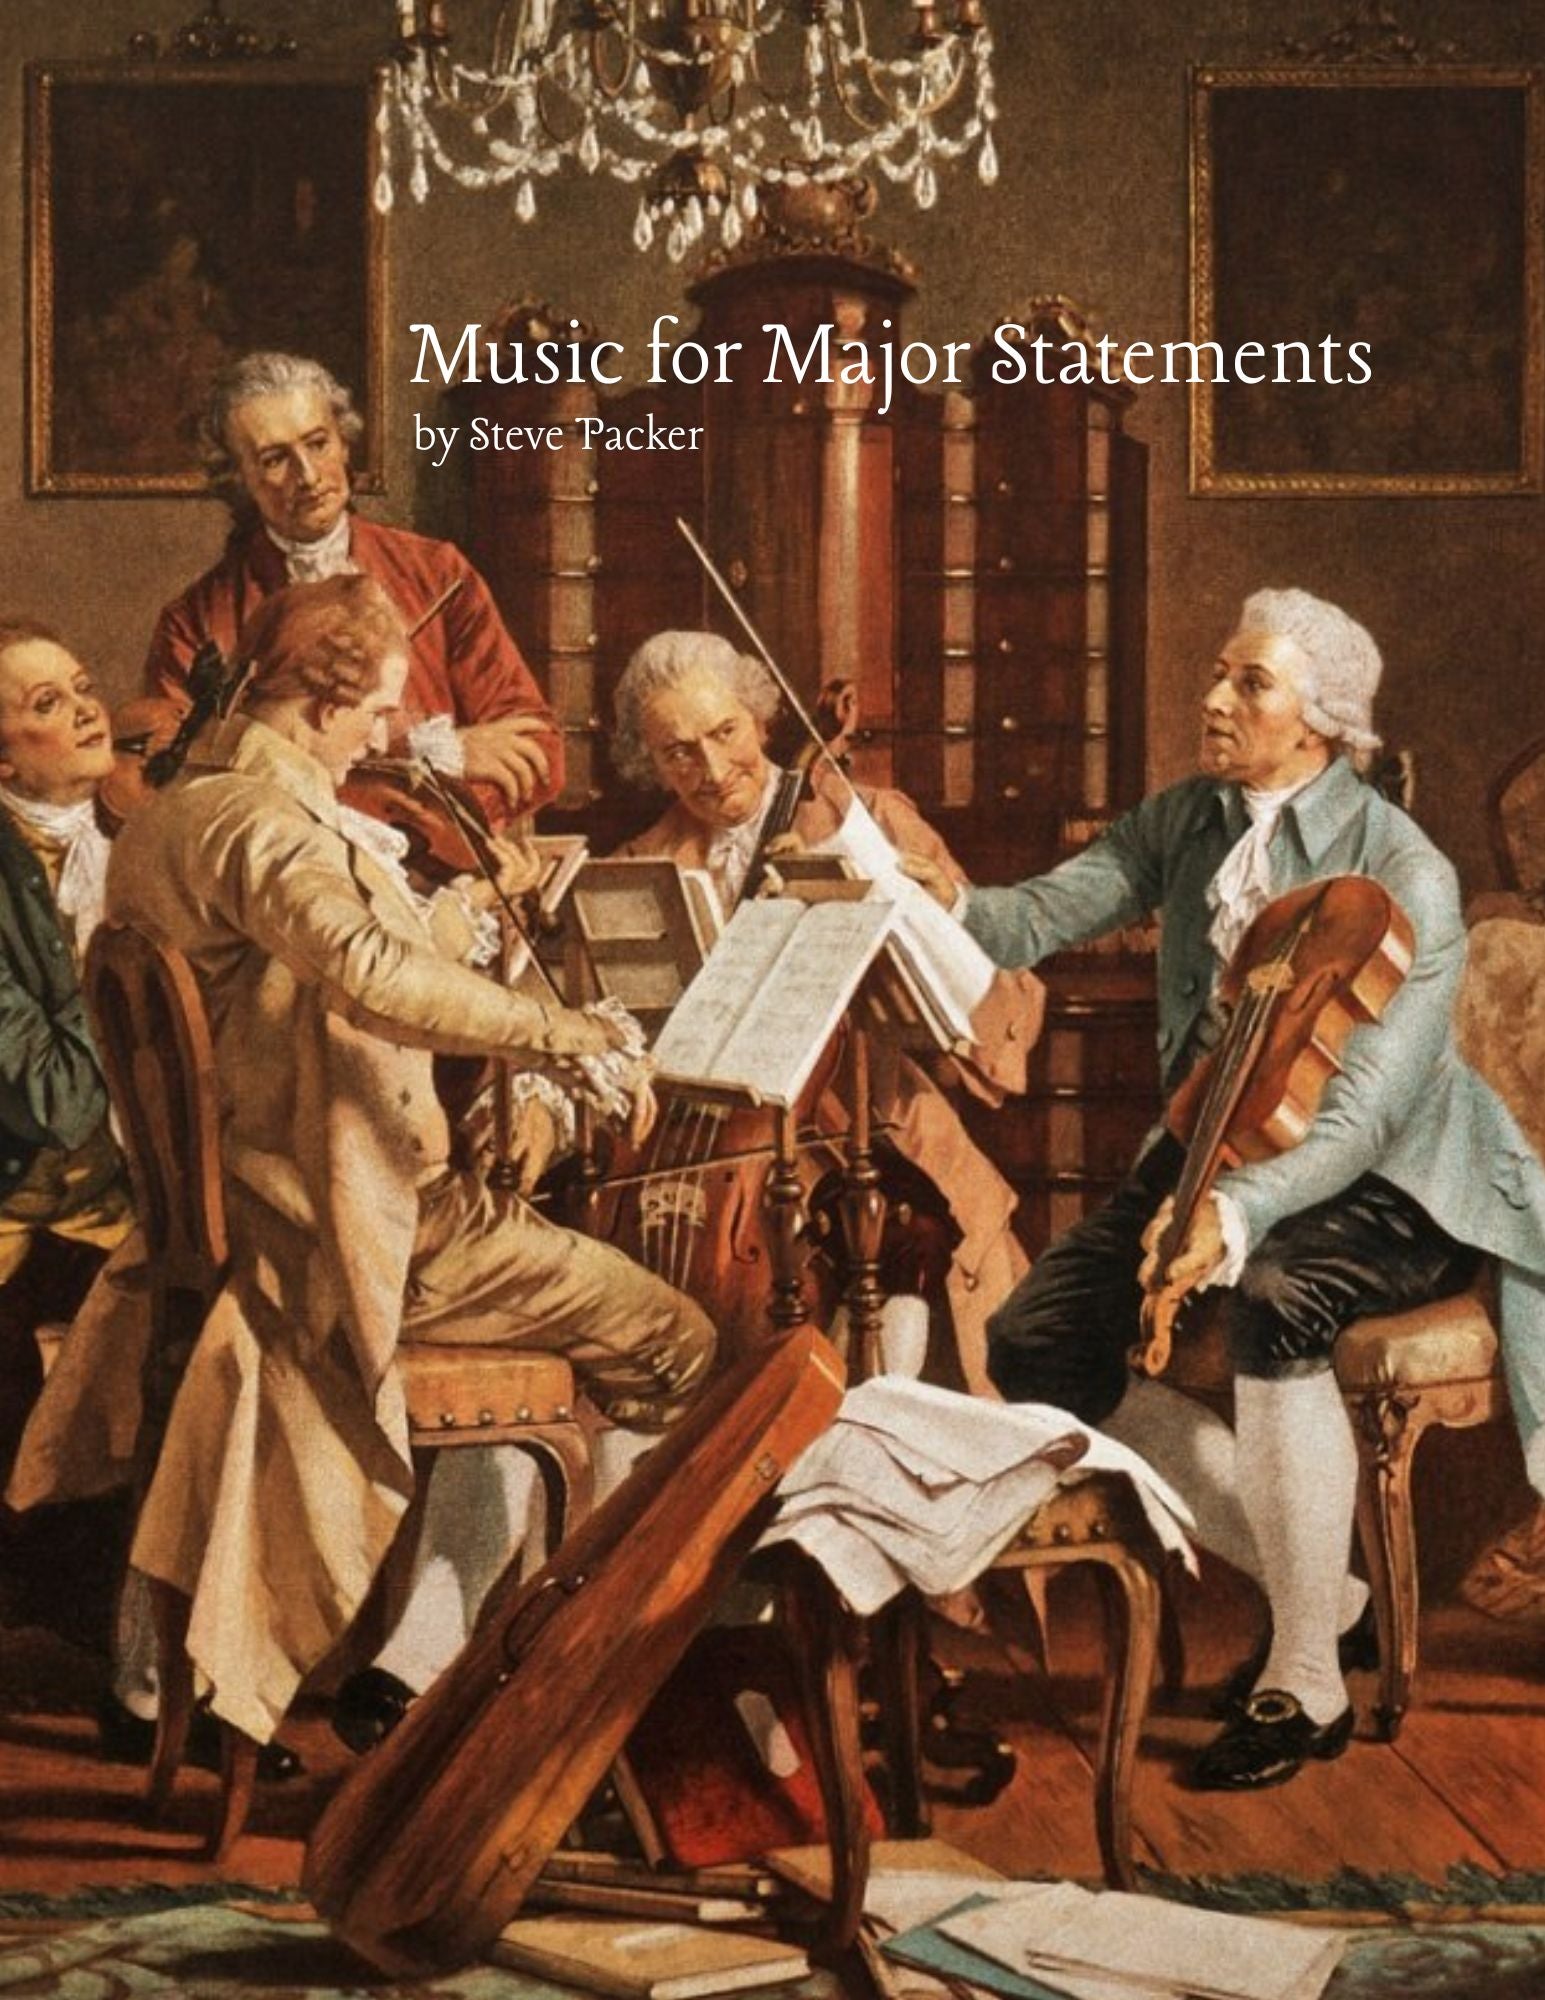 ESSAY: Music for Major Statements